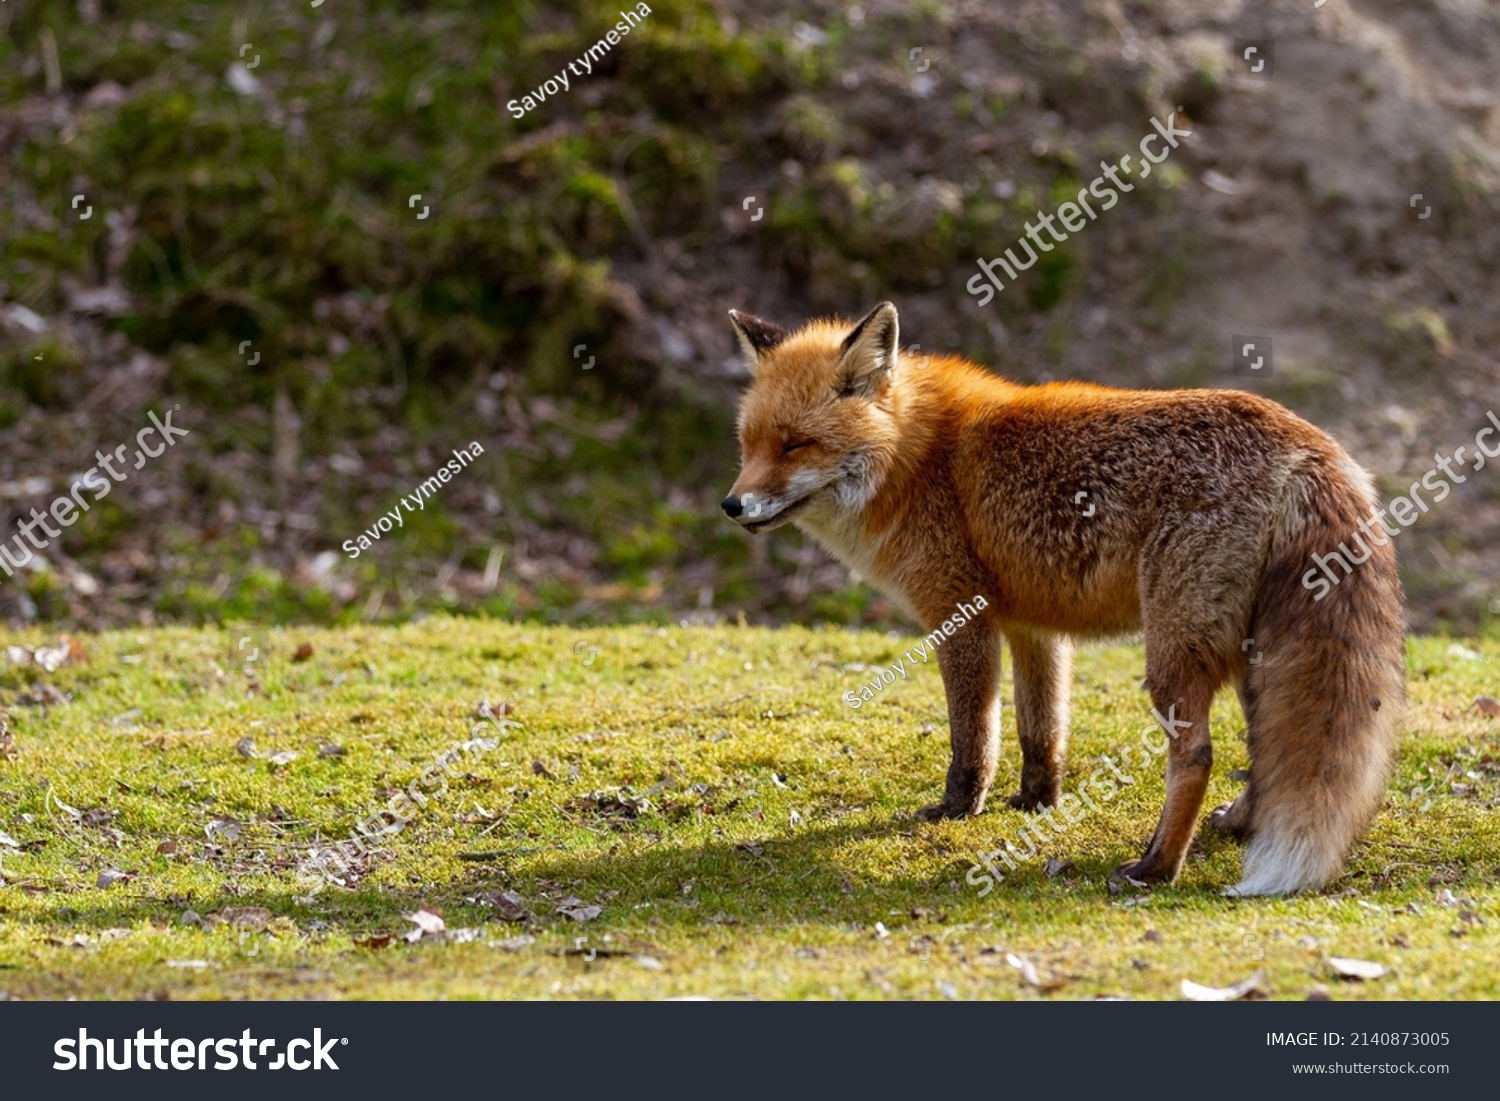 Animal photography photos about foxes #2140873005